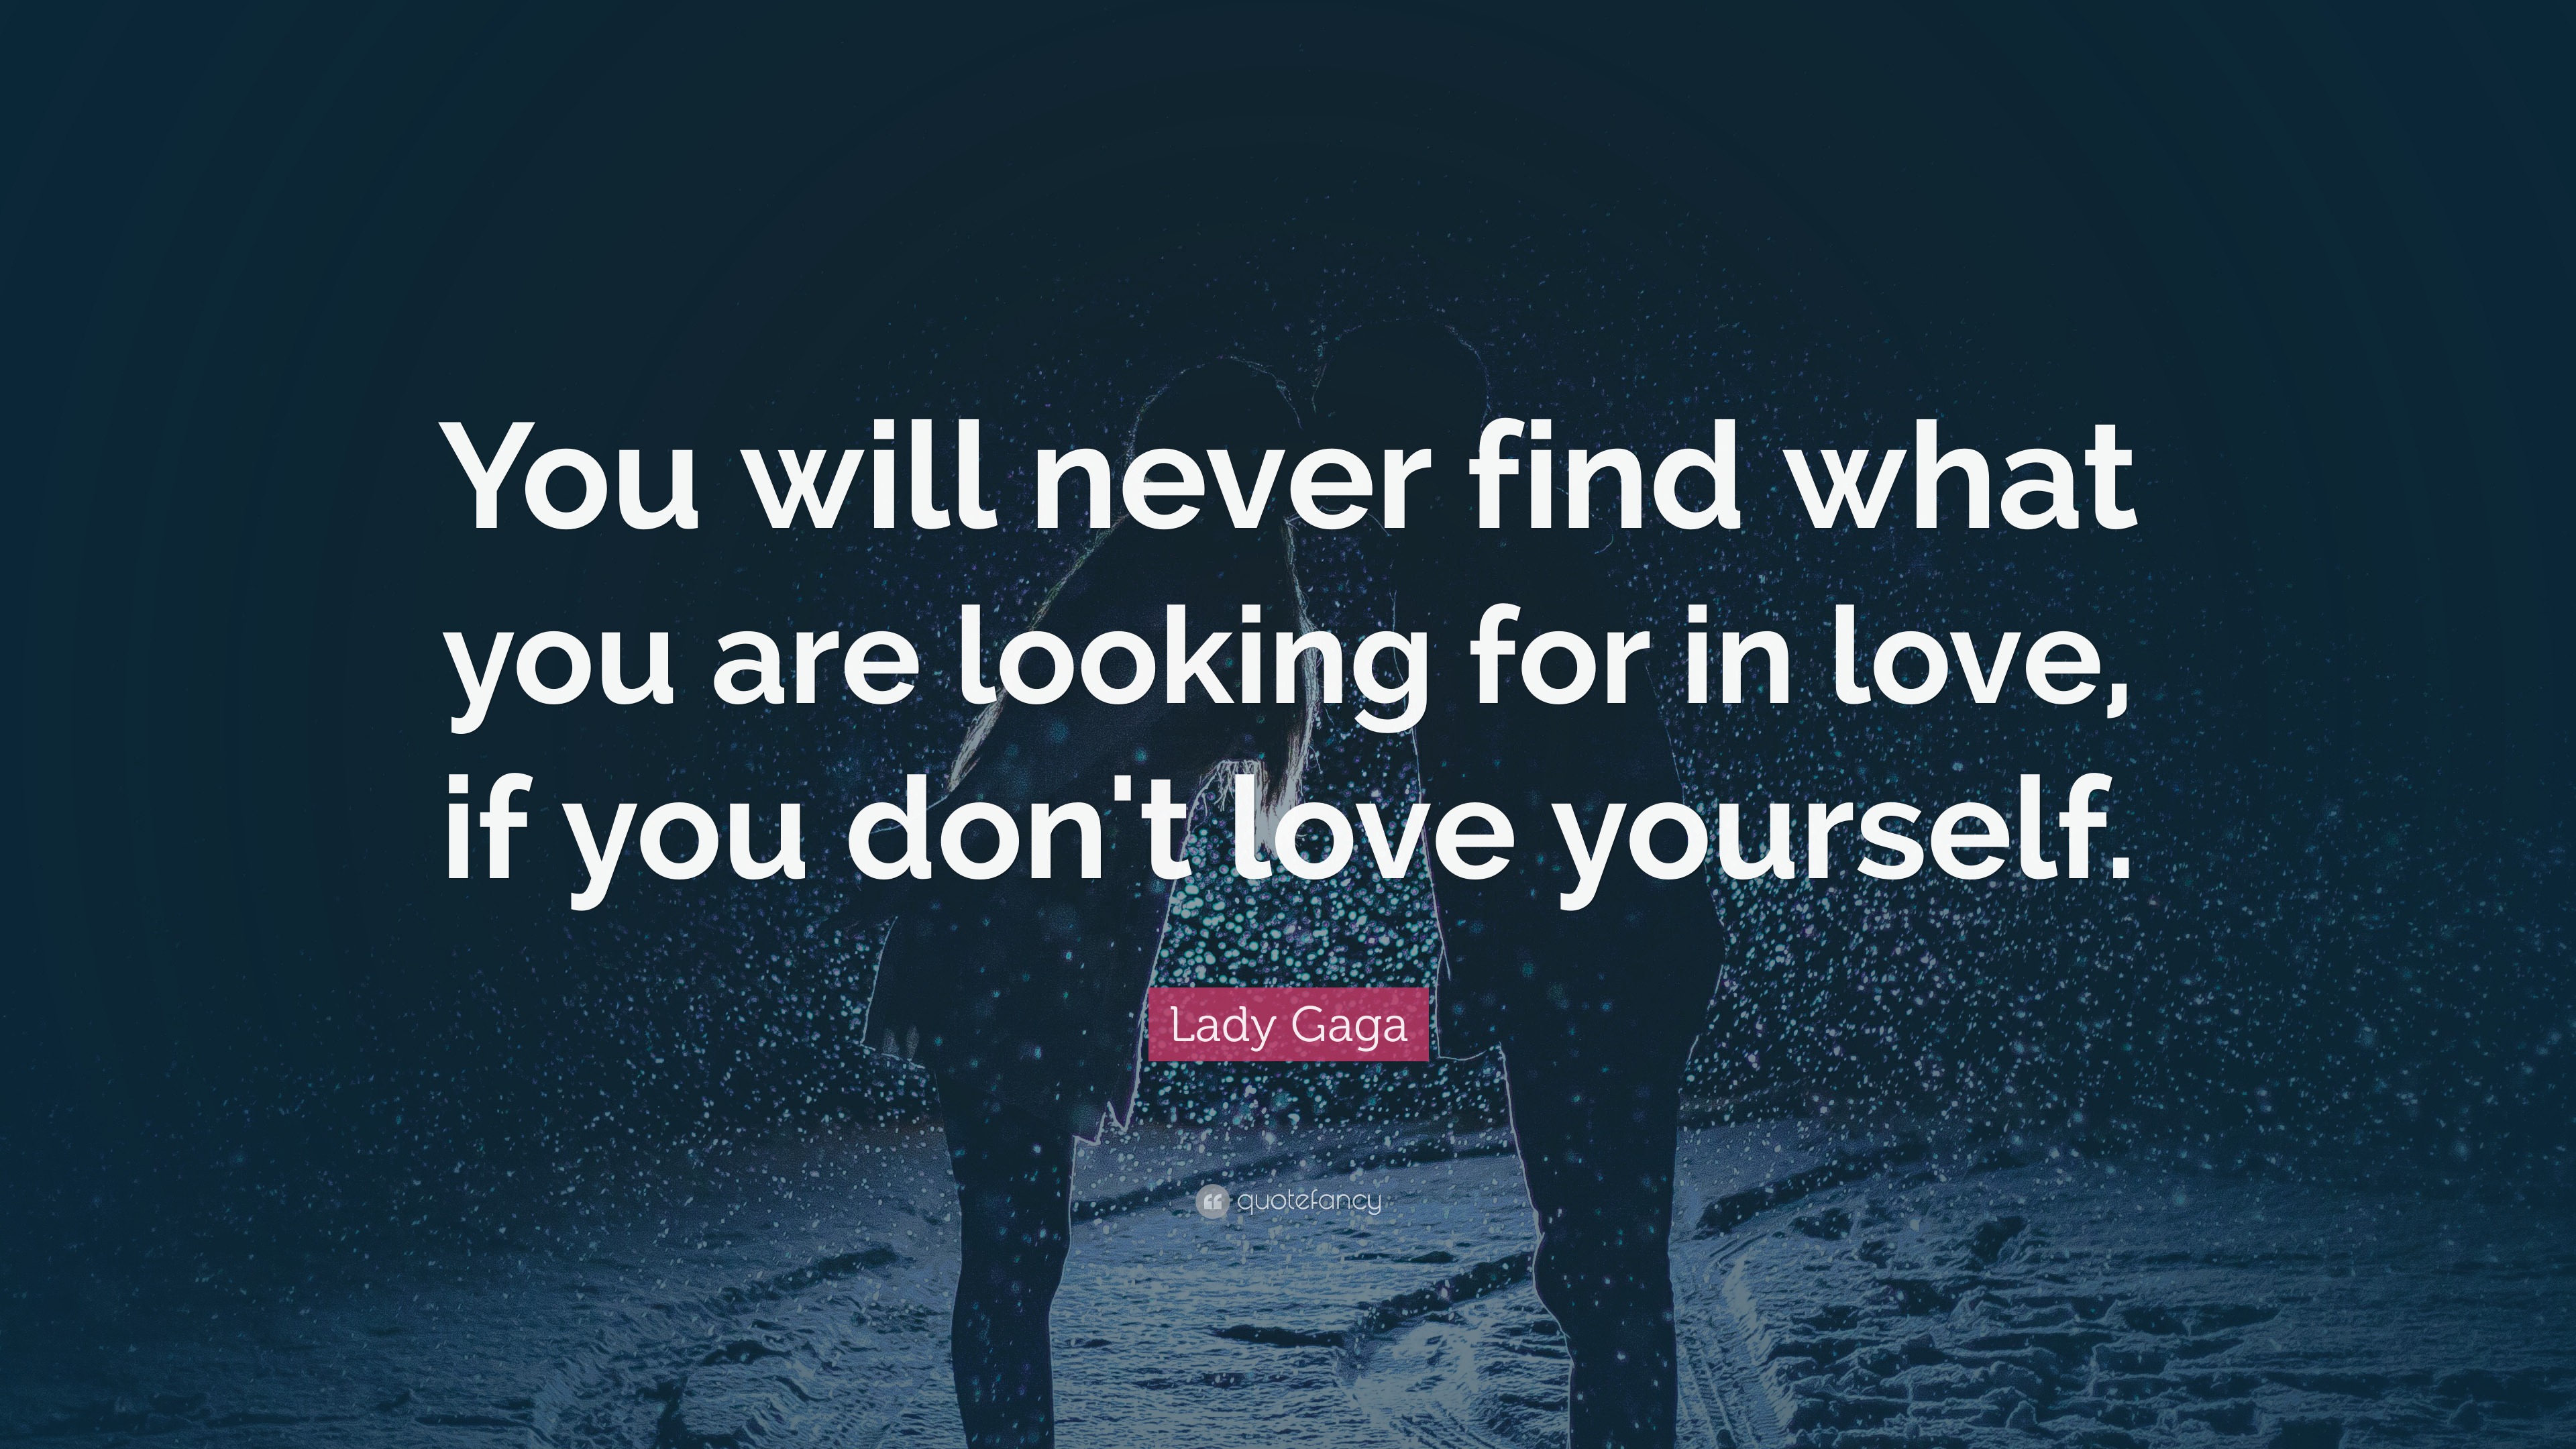 Lady Gaga Quote “You will never find what you are looking for in love